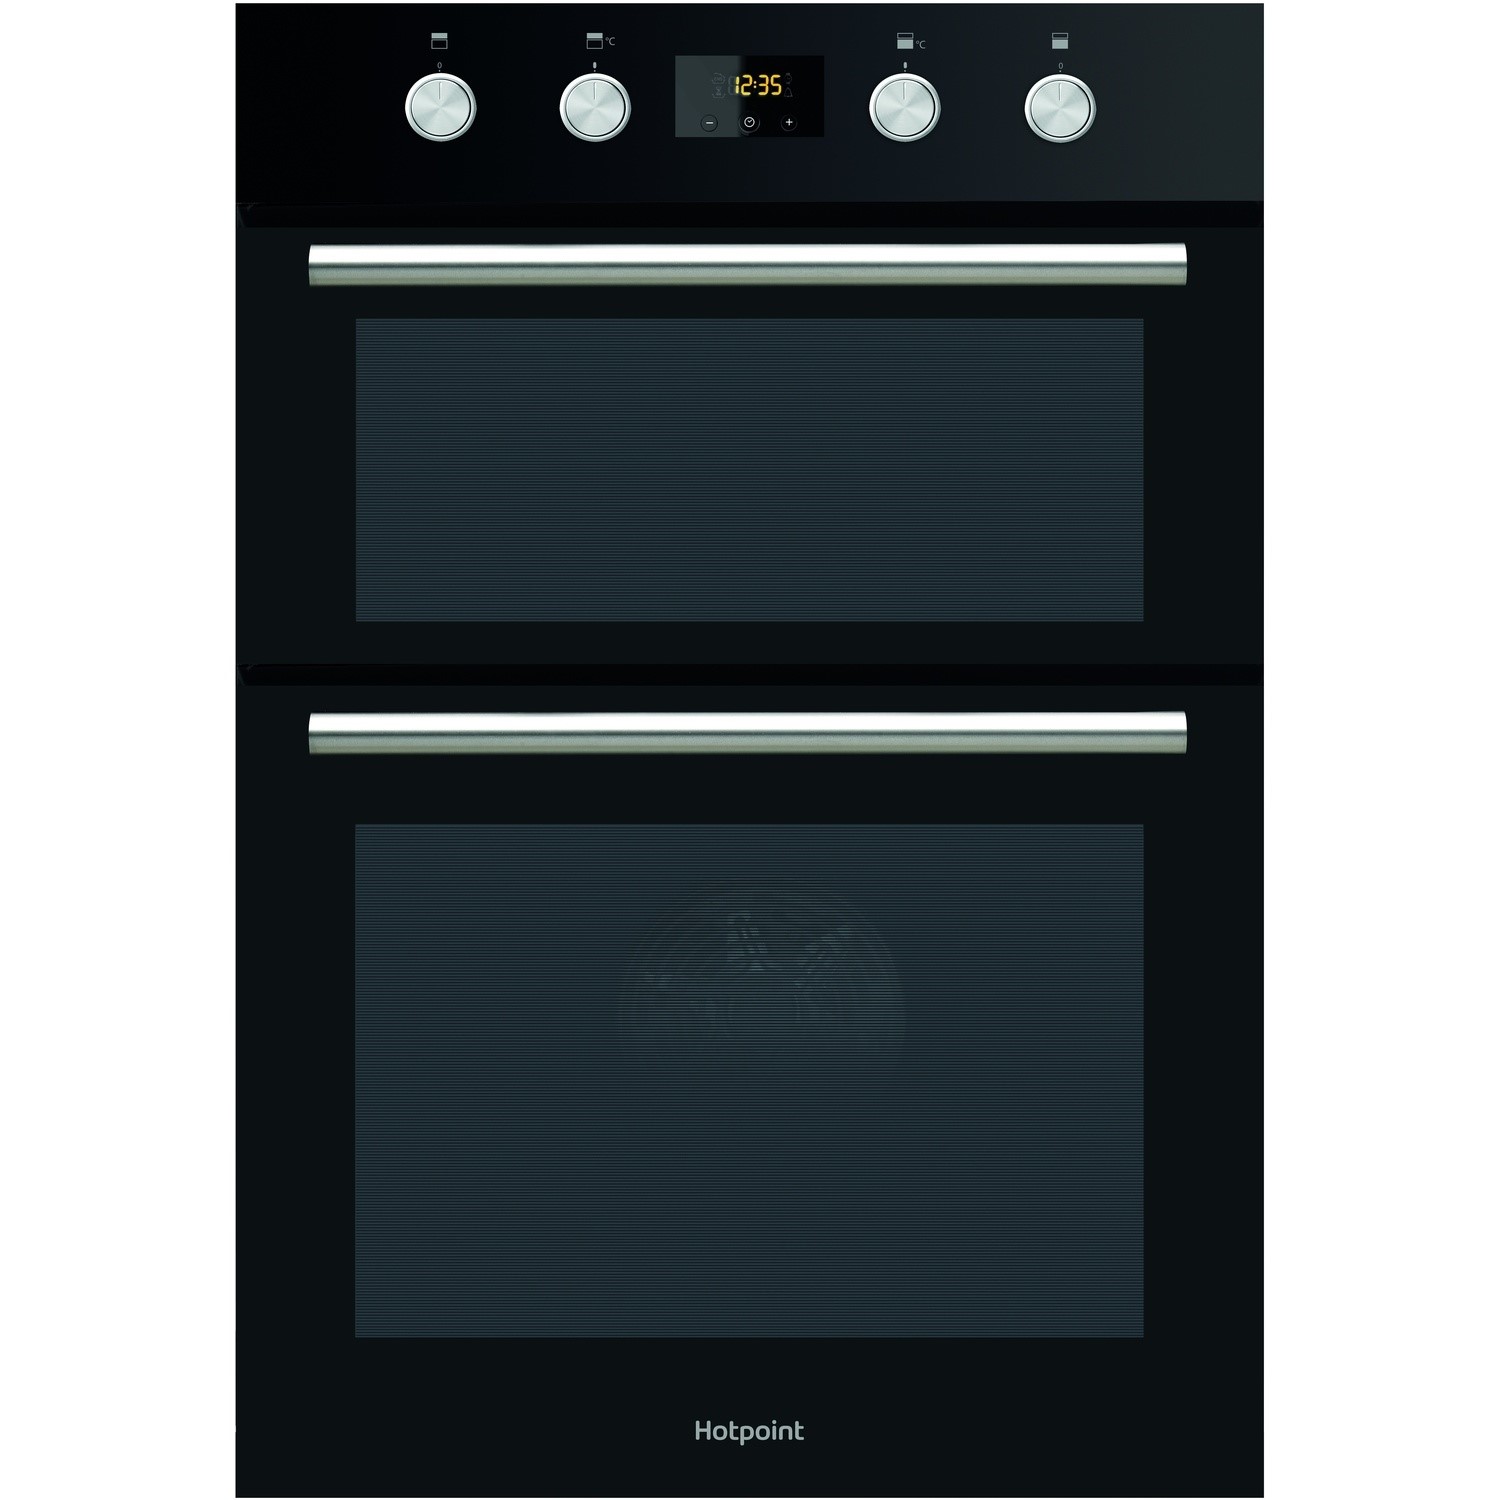 Hotpoint Class 2 DD2844CBL Built In Electric Double Oven - Black - A/A Rated